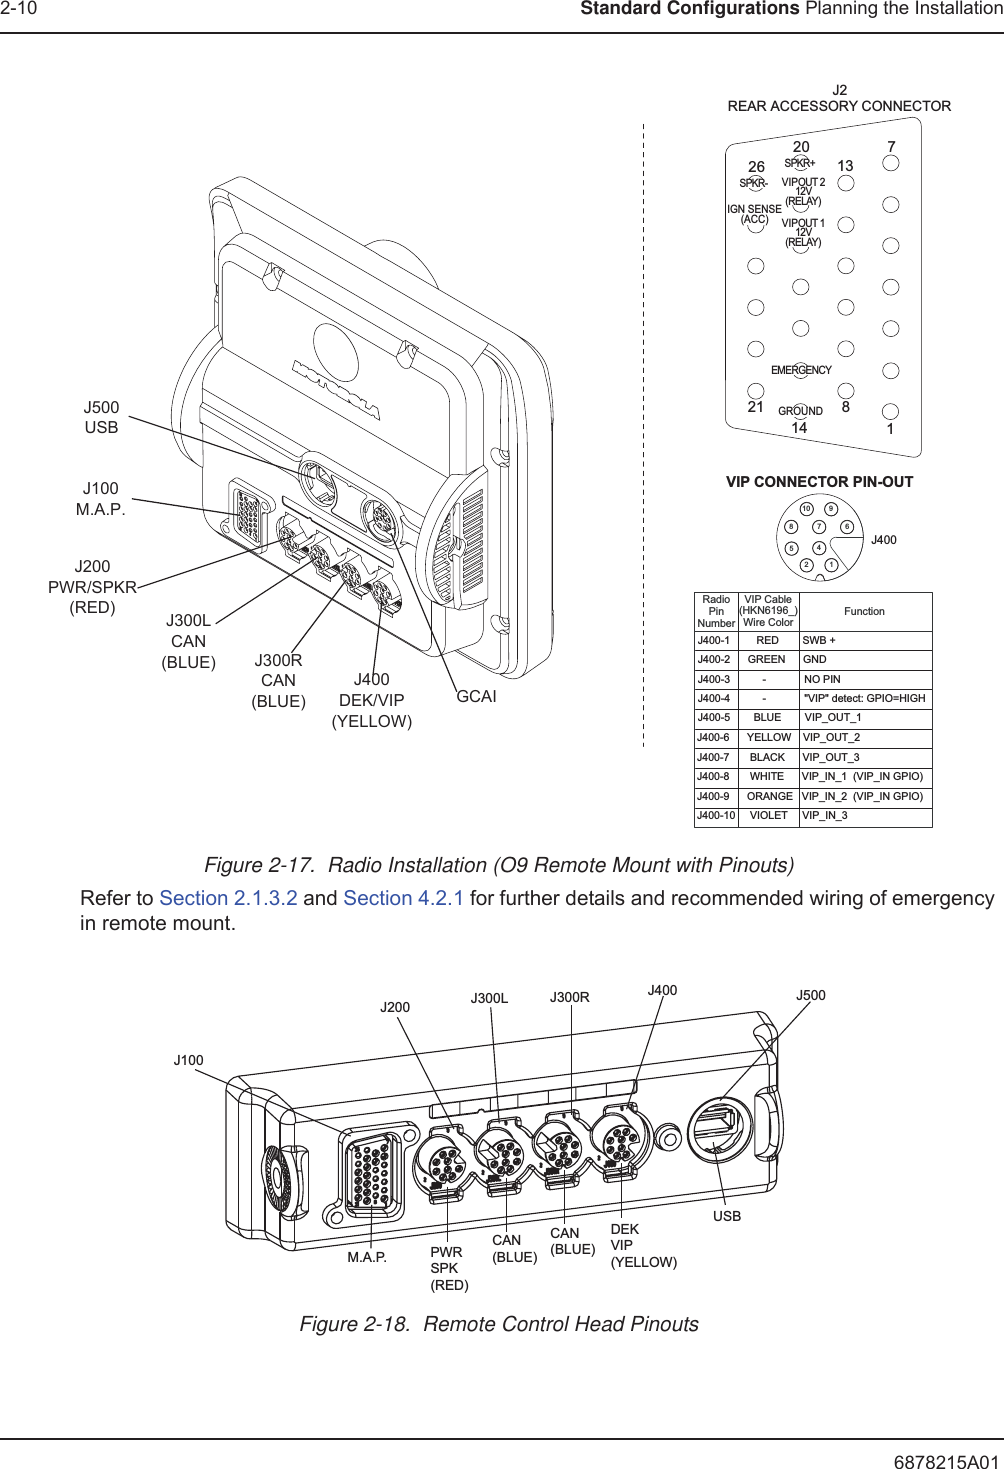 6878215A012-10 Standard Configurations Planning the InstallationFigure 2-17.  Radio Installation (O9 Remote Mount with Pinouts)Refer to Section 2.1.3.2 and Section 4.2.1 for further details and recommended wiring of emergency in remote mount.Figure 2-18.  Remote Control Head PinoutsVIP CONNECTOR PIN-OUTJ4006910742581J400-1         RED        SWB +J400-2      GREEN      GNDJ400-3           -             NO PINJ400-4           -             &quot;VIP&quot; detect: GPIO=HIGHJ400-5        BLUE        VIP_OUT_1 J400-6      YELLOW    VIP_OUT_2J400-7       BLACK      VIP_OUT_3J400-8       WHITE      VIP_IN_1  (VIP_IN GPIO)J400-9      ORANGE   VIP_IN_2  (VIP_IN GPIO)J400-10     VIOLET     VIP_IN_3 RadioPinNumberVIP Cable(HKN6196_)Wire ColorFunctionJ2REAR ACCESSORY CONNECTOR1781413202126SPKR-SPKR+VIPOUT 212V(RELAY)VIPOUT 112V(RELAY)GROUNDEMERGENCYIGN SENSE(ACC)GCAIJ400DEK/VIP(YELLOW)J300RCAN(BLUE)J500USBJ100M.A.P.J200PWR/SPKR(RED) J300LCAN(BLUE)M.A.P.  PWRSPK (RED)CAN(BLUE)CAN(BLUE)DEKVIP(YELLOW)USBJ100J200 J300L J300R J400 J500